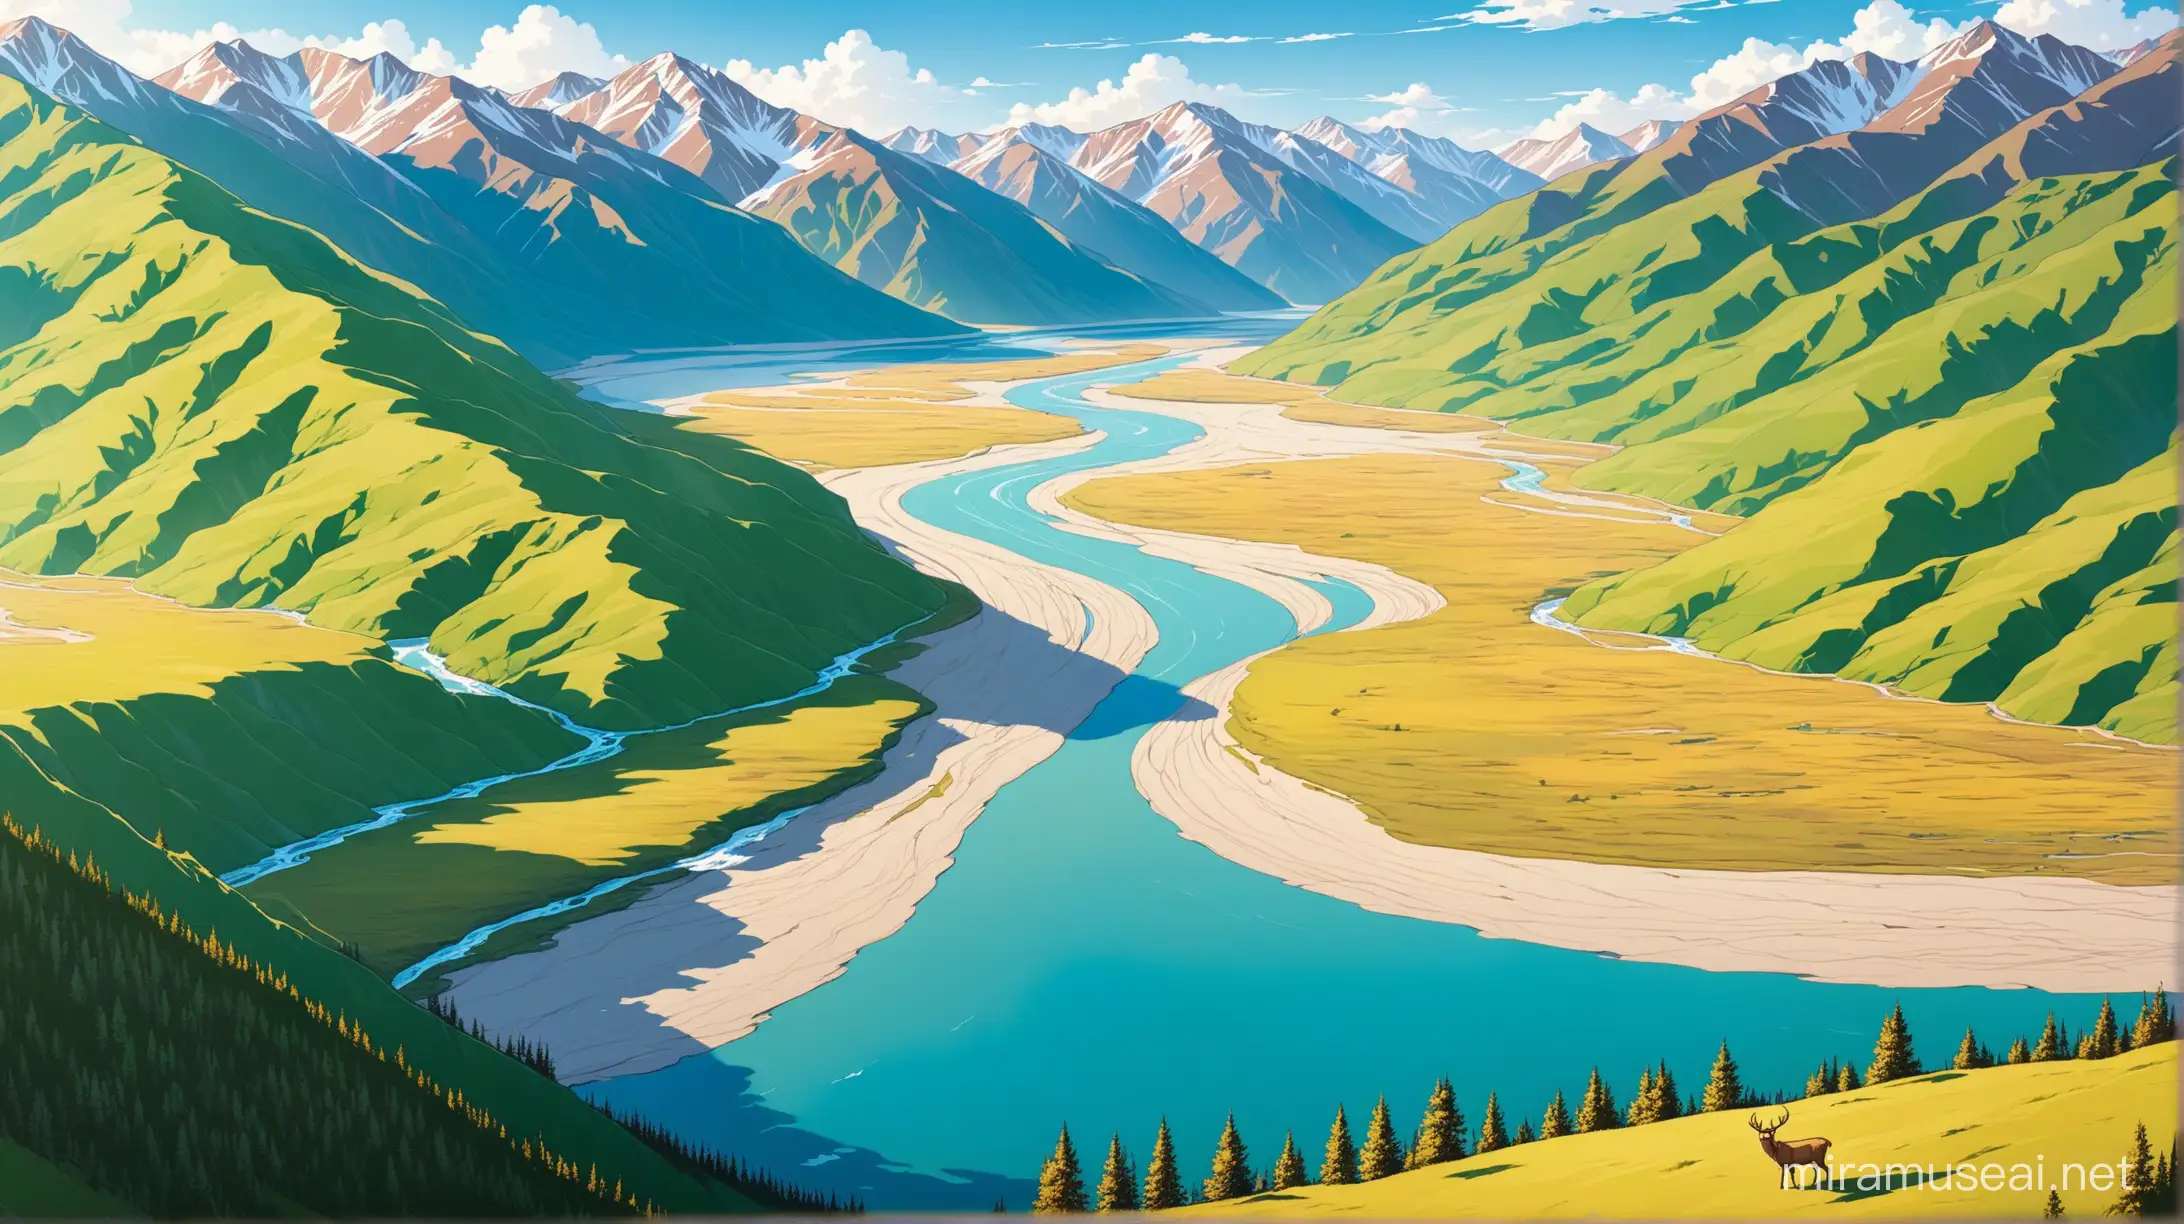 Altai mountains, Altai nature, aerial perspective, katun river, deer in the foreground stands on a hill, dramatic, natural colors, illustration, book illustration
